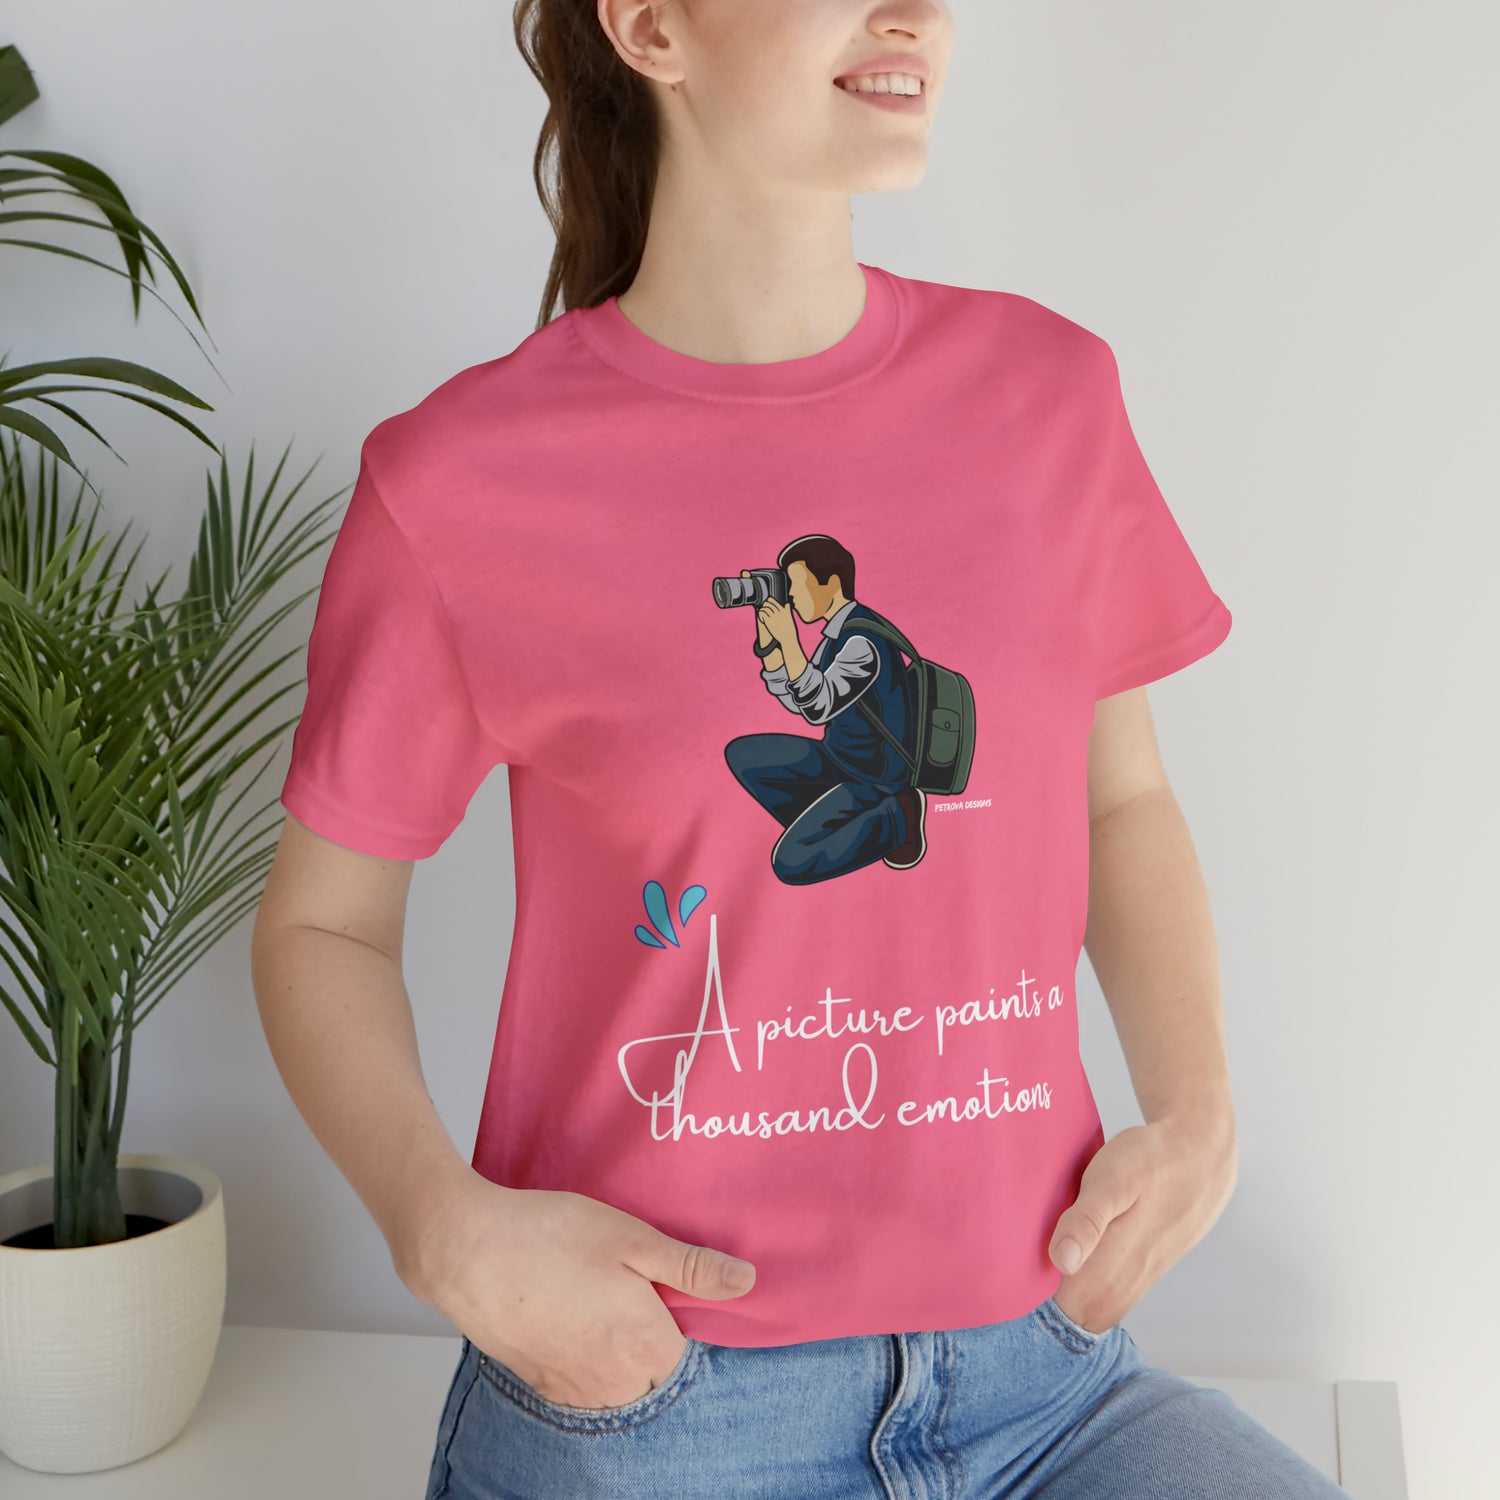 Charity Pink T-Shirt Tshirt Design Gift for Friend and Family Short Sleeved Shirt Petrova Designs